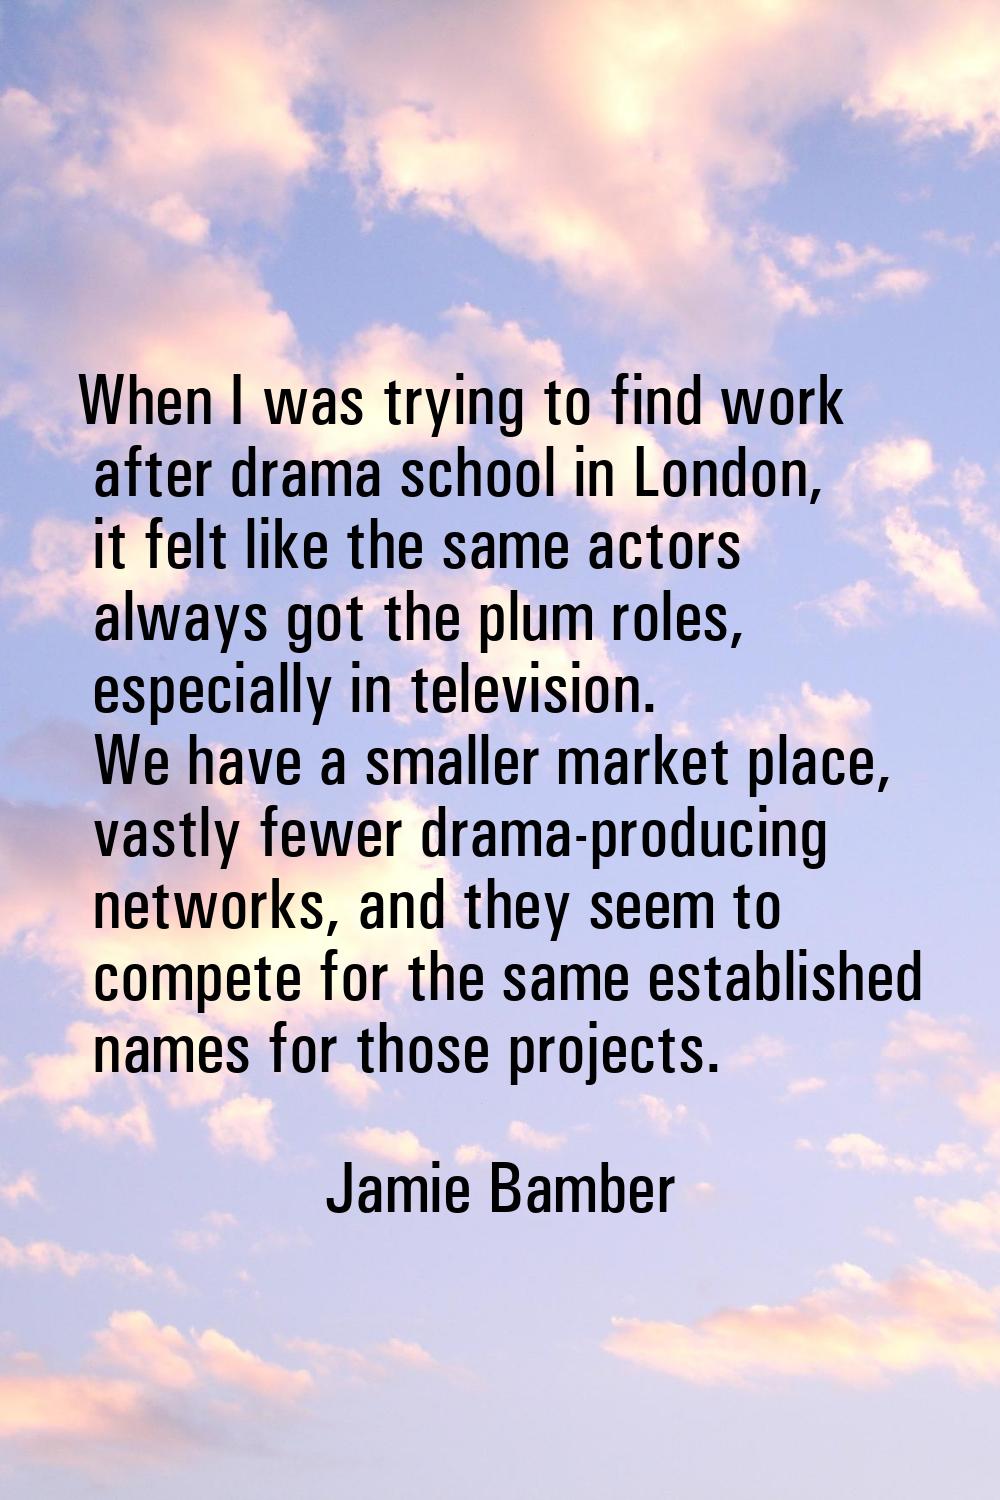 When I was trying to find work after drama school in London, it felt like the same actors always go